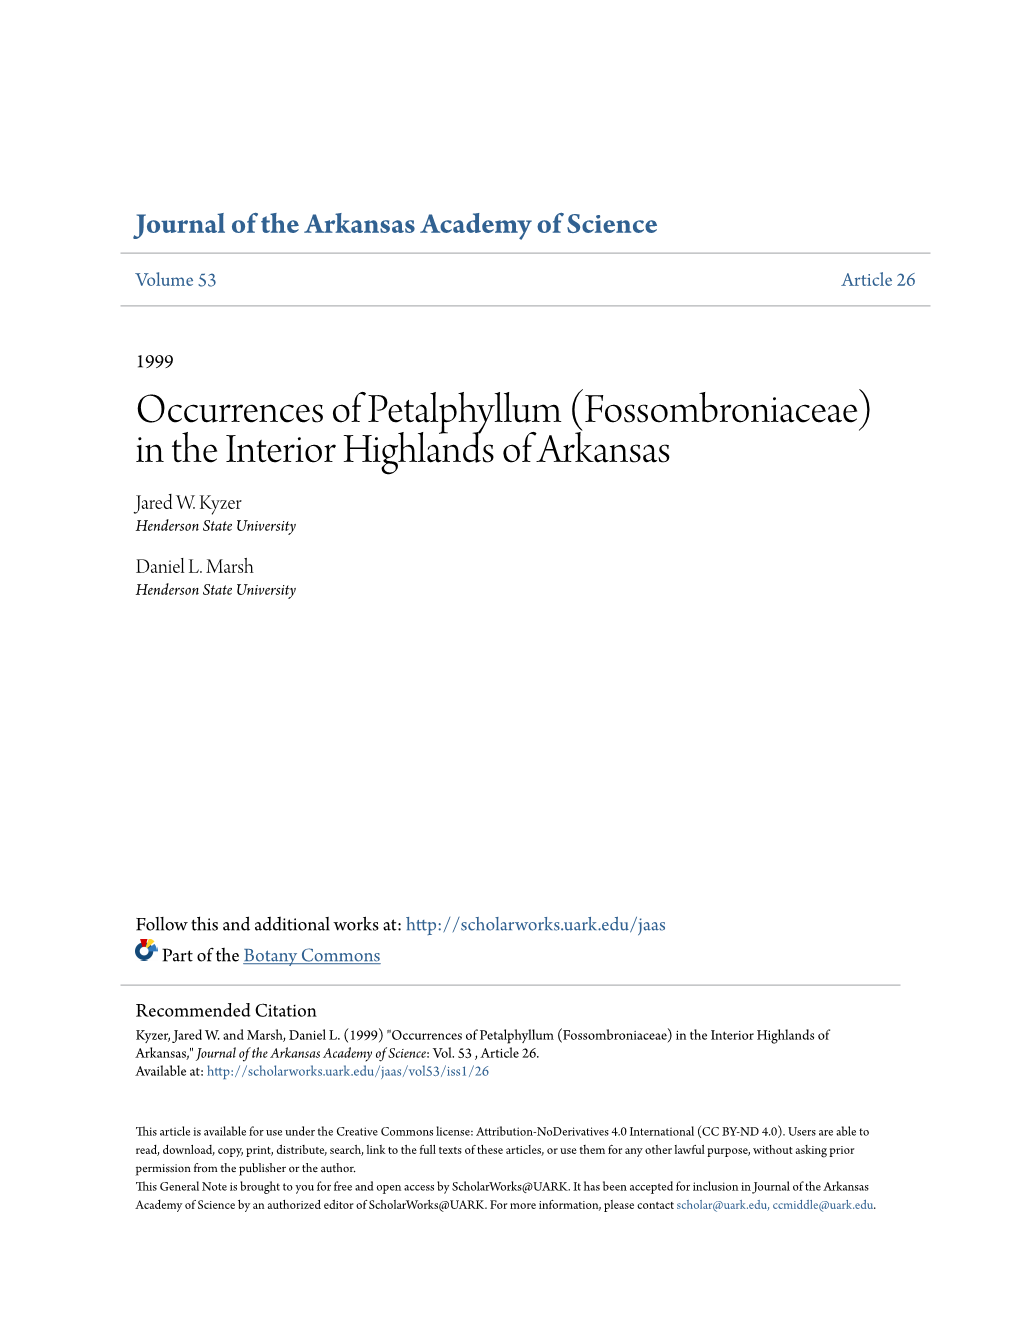 Occurrences of Petalphyllum (Fossombroniaceae) in the Interior Highlands of Arkansas Jared W